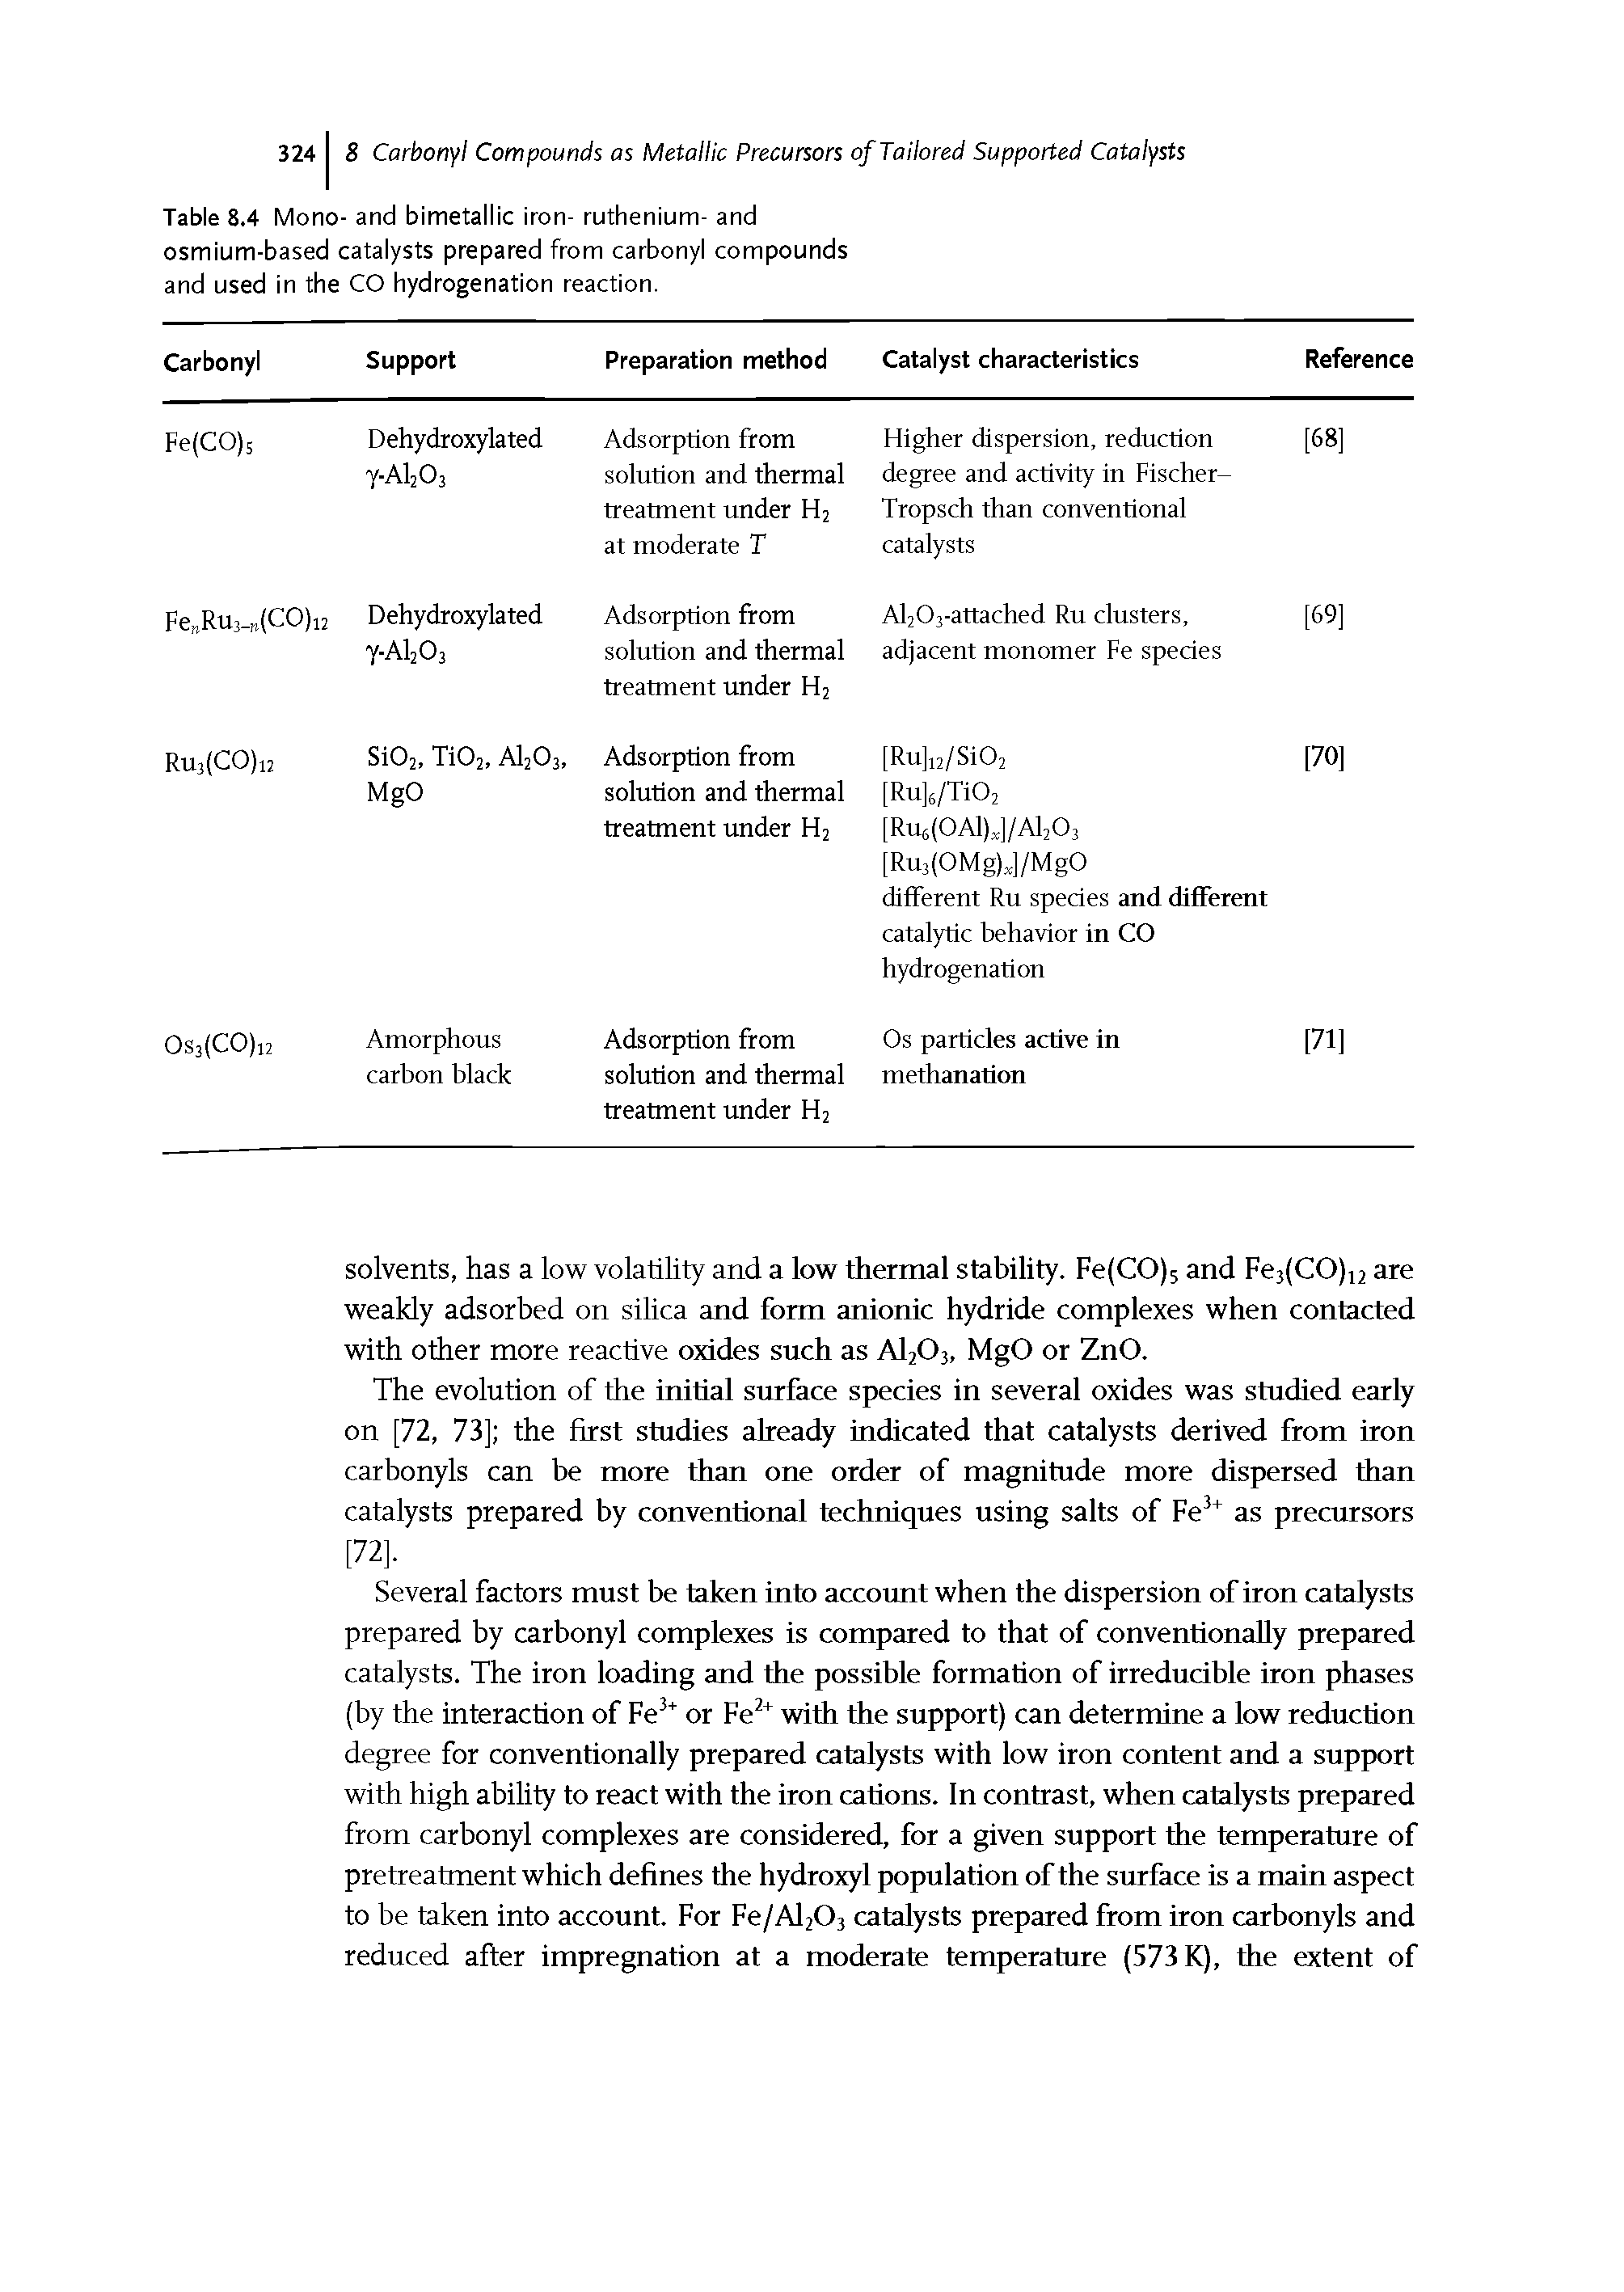 Table 8.4 Mono- and bimetallic iron- ruthenium- and osmium-based catalysts prepared from carbonyl compounds and used in the CO hydrogenation reaction.